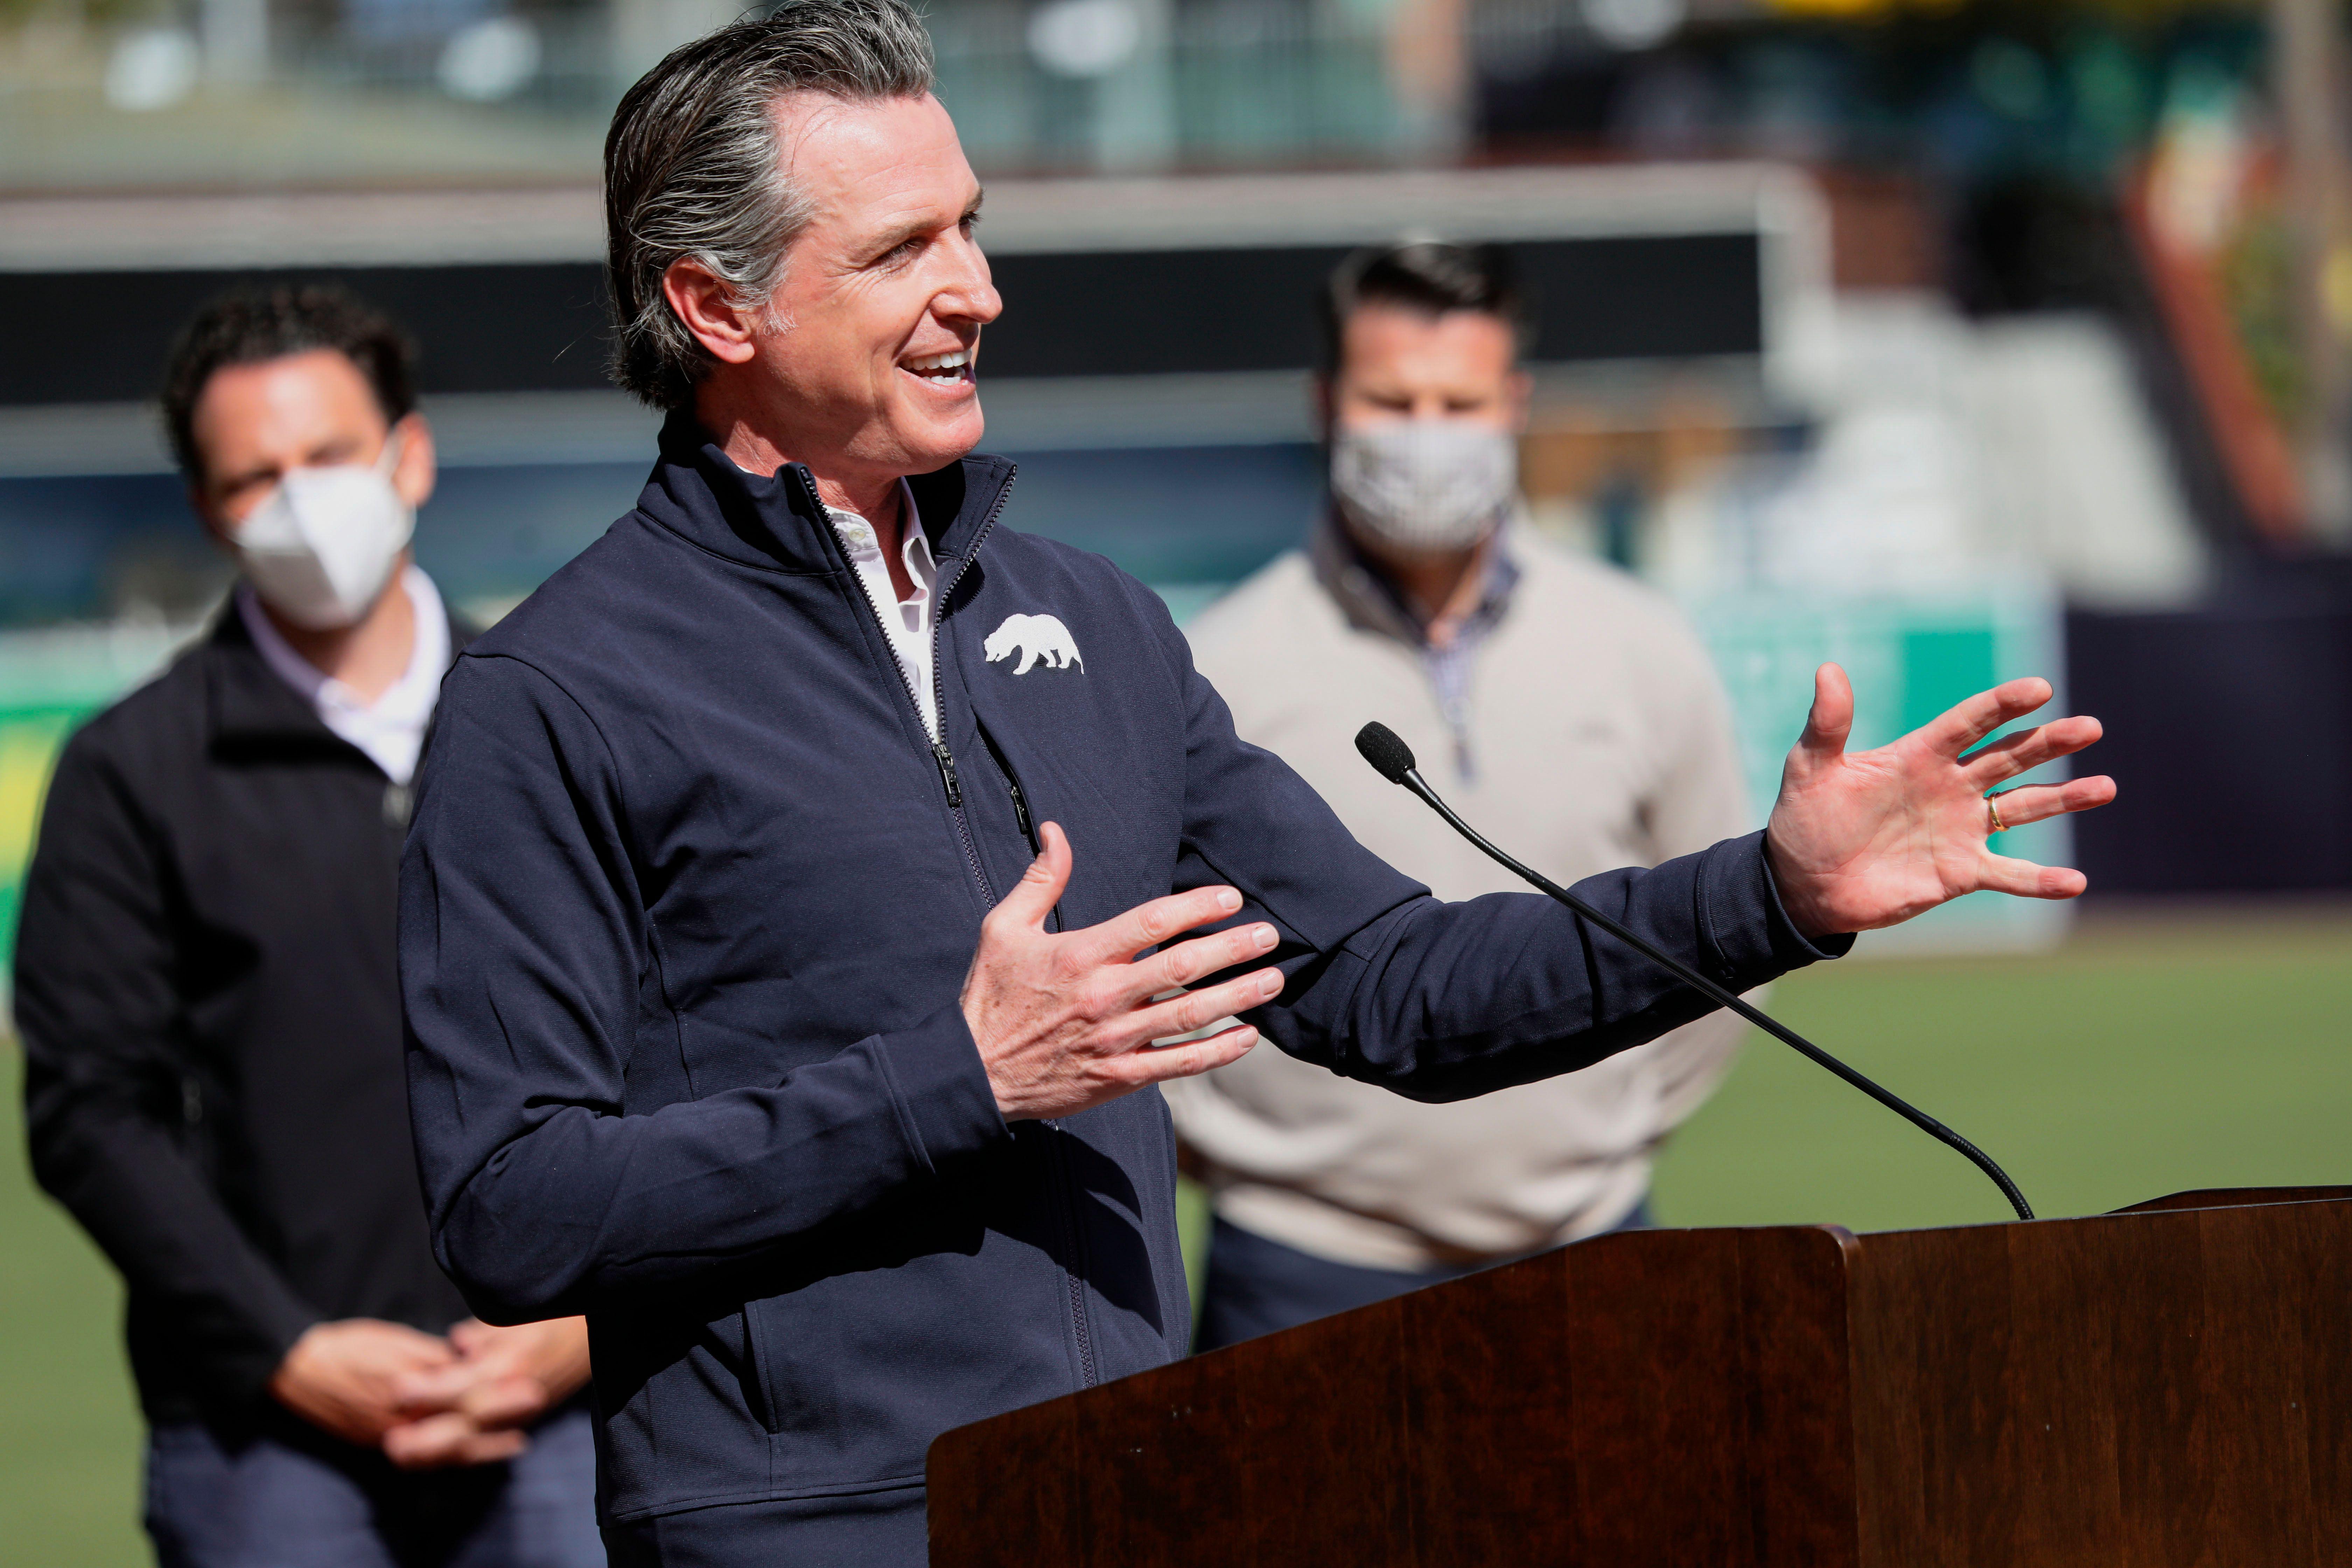 Newsom smiles and gestures as he speaks at a podium on a baseball field, with two men wearing masks in the background